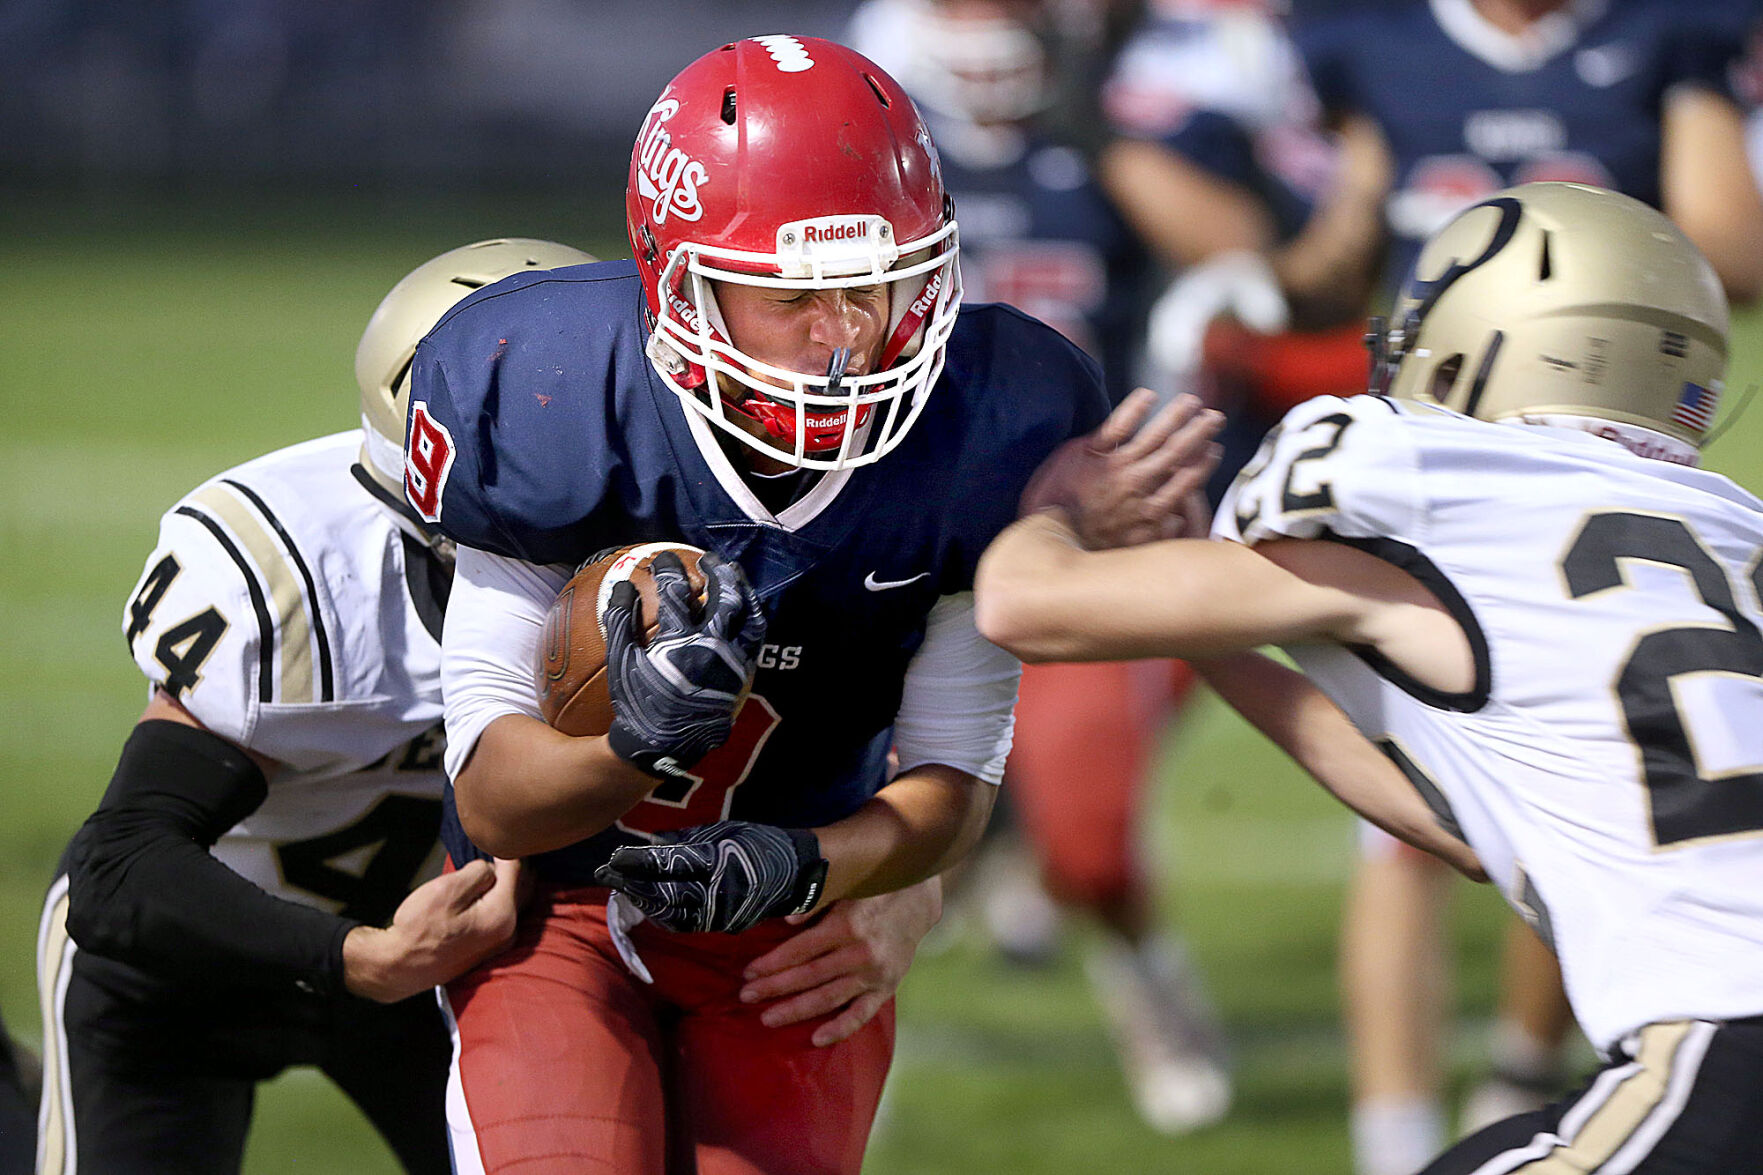 Lewis Cass, Eastern, Tipton, Guerin Catholic, and Carroll Win Big in Class 2A Sectional 34